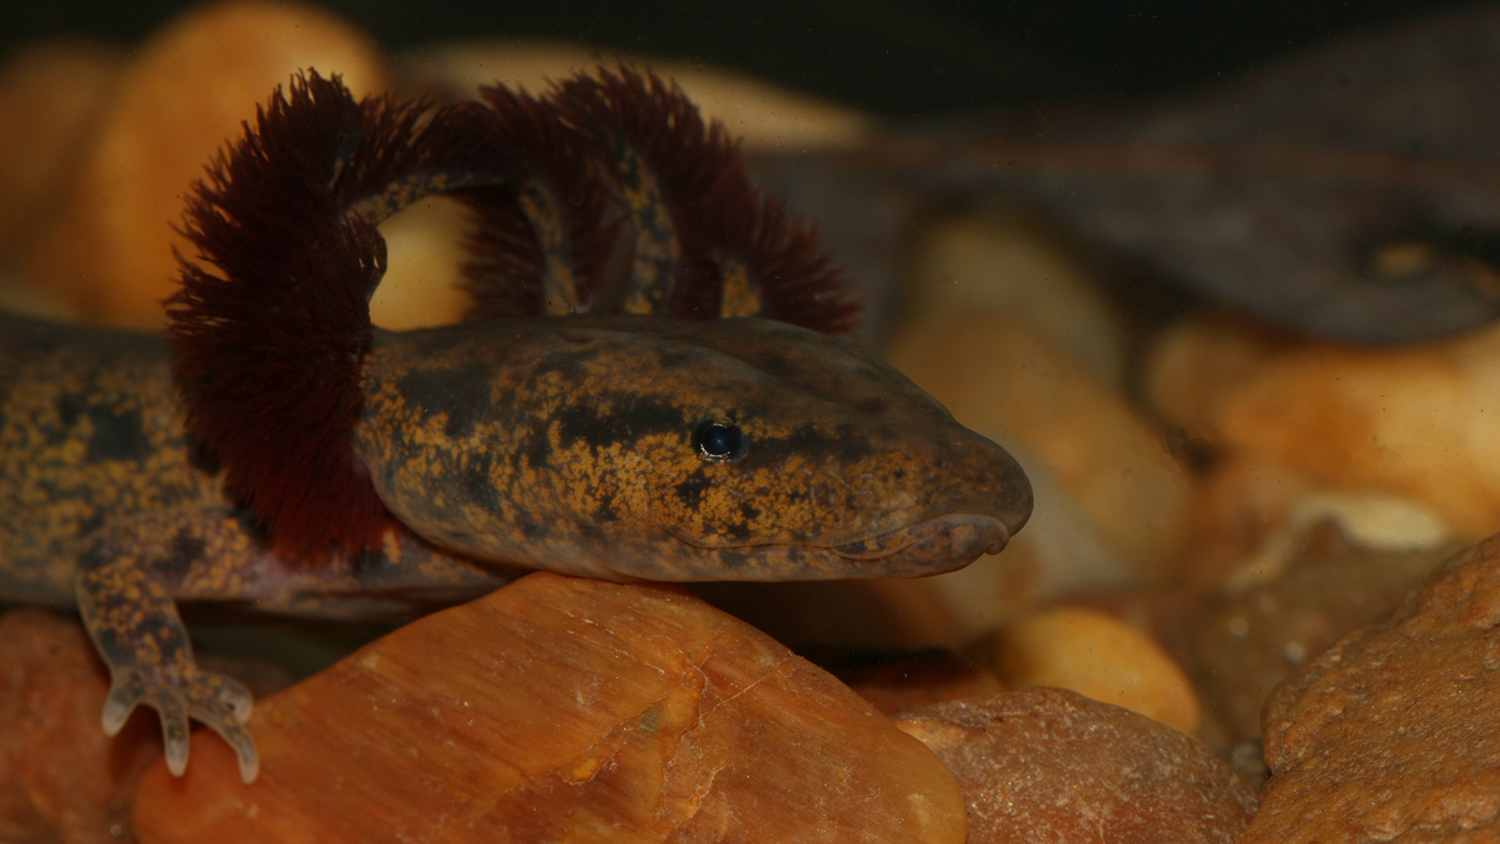 A Neuse River Waterdog salamander resting on rocks at the bottom of a stream - Saving the Neuse River Waterdog - College of Natural Resources News NC State University